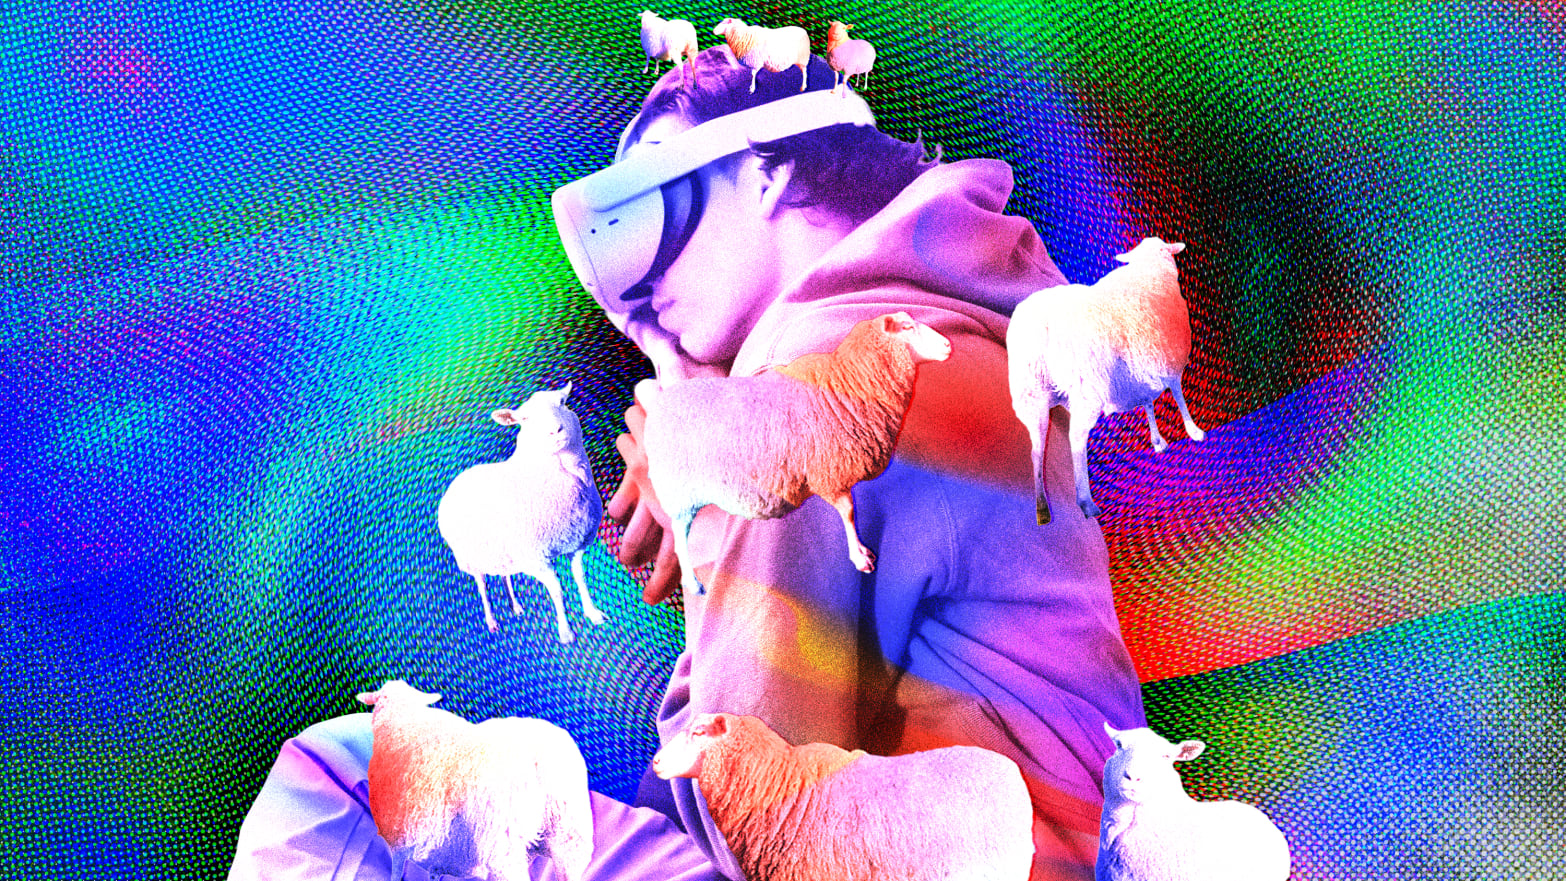 A photo illustration of a person sleeping with a VR headset and counting sheep.